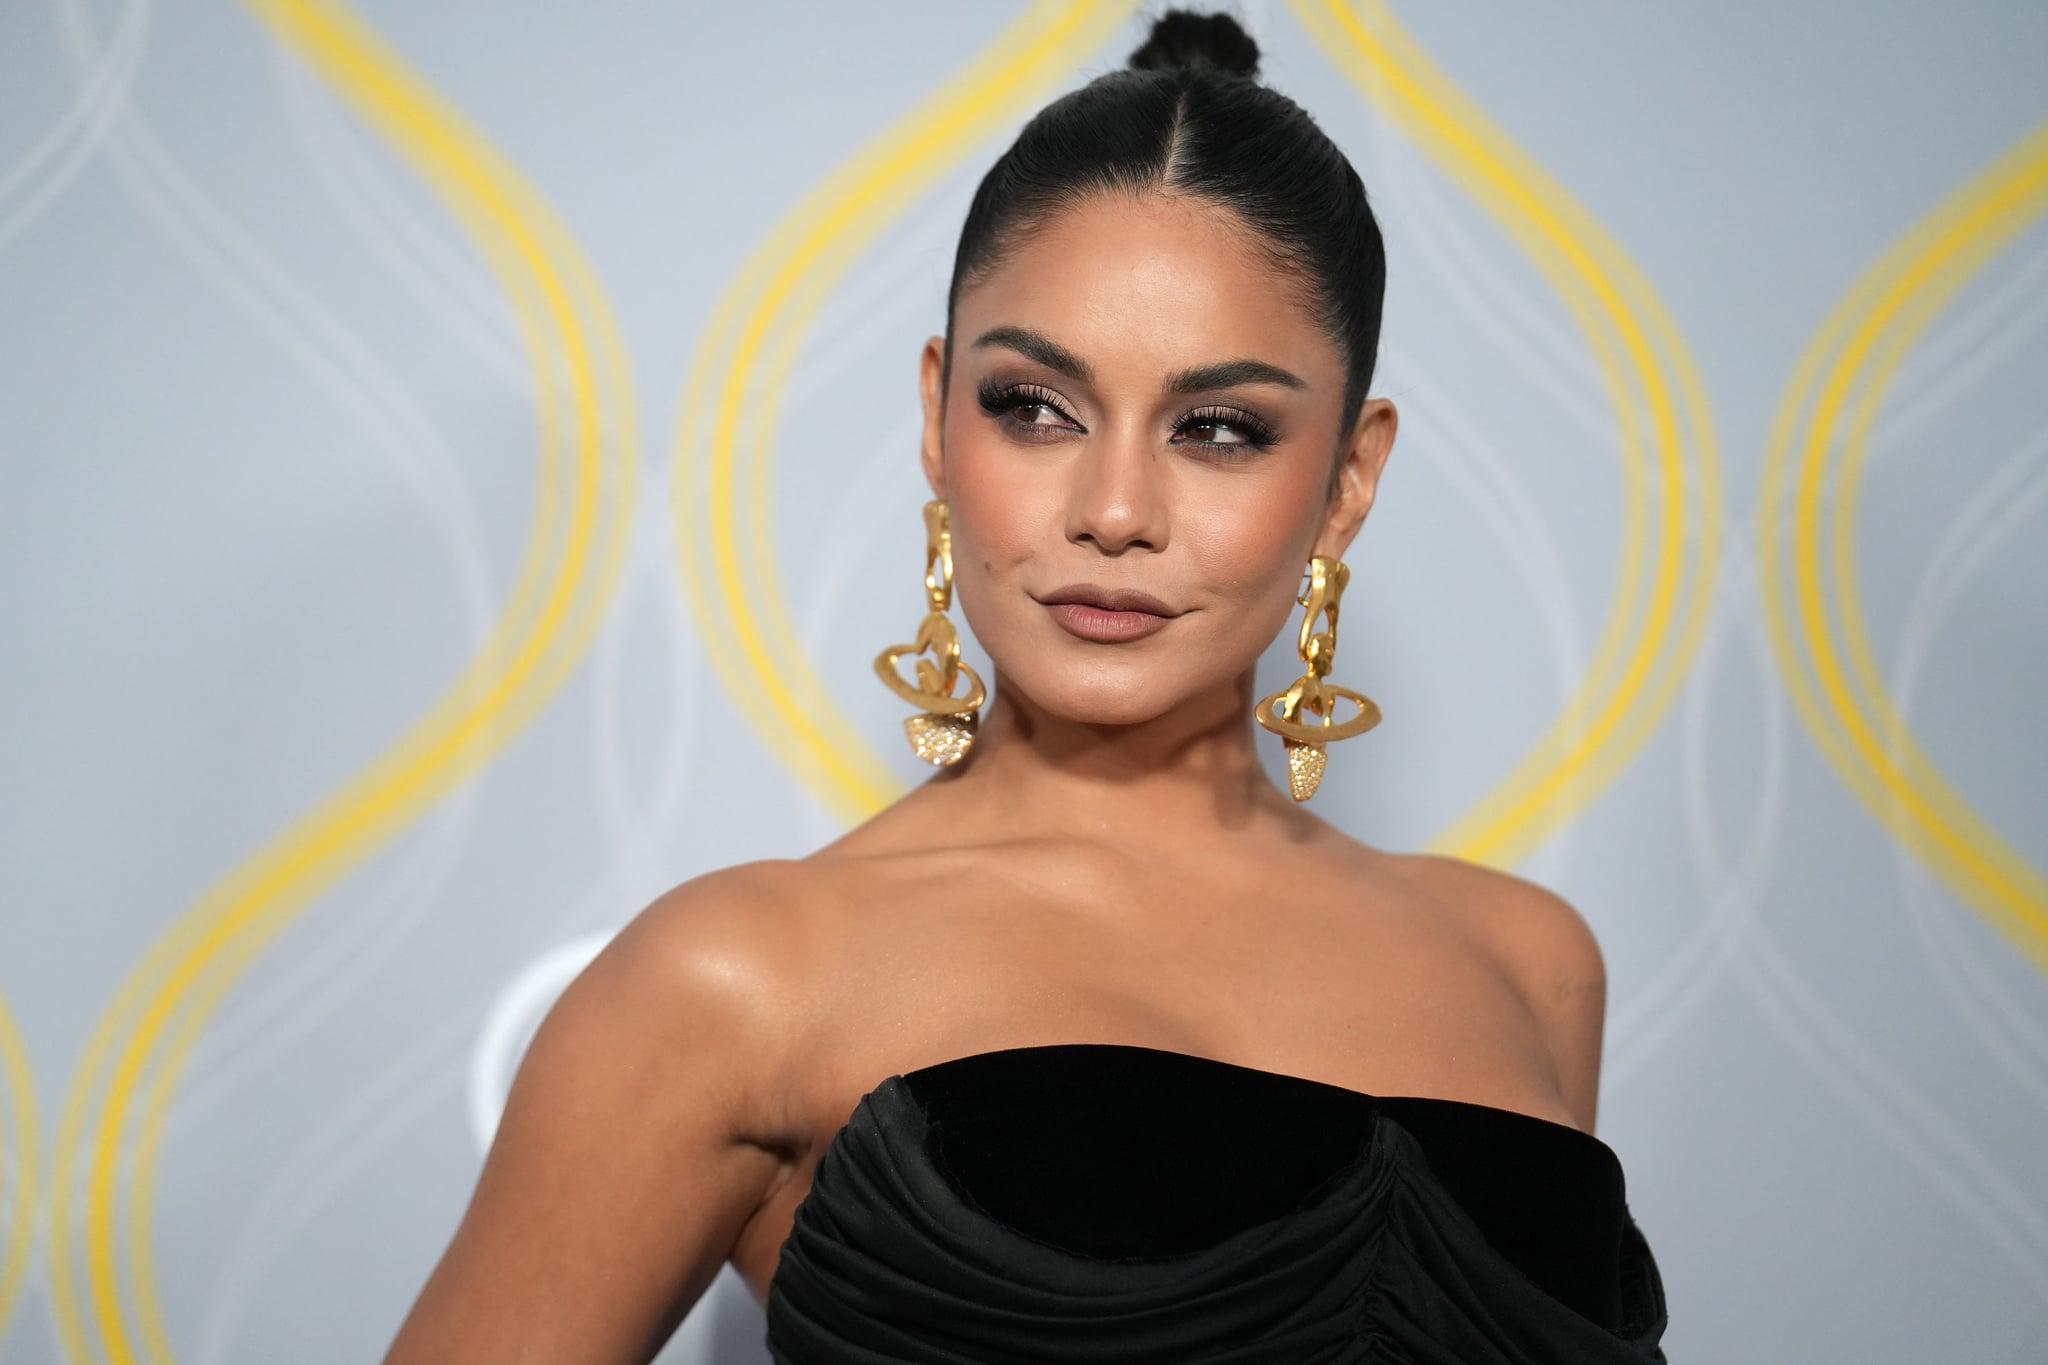 NEW YORK, NY - JUNE 12: Vanessa Hudgens attends the 75th Annual Tony Awards - Arrivals at Radio City Music Hall on June 12, 2022 in New York City.  (Photo by Sean Zanni/Patrick McMullan via Getty Images)